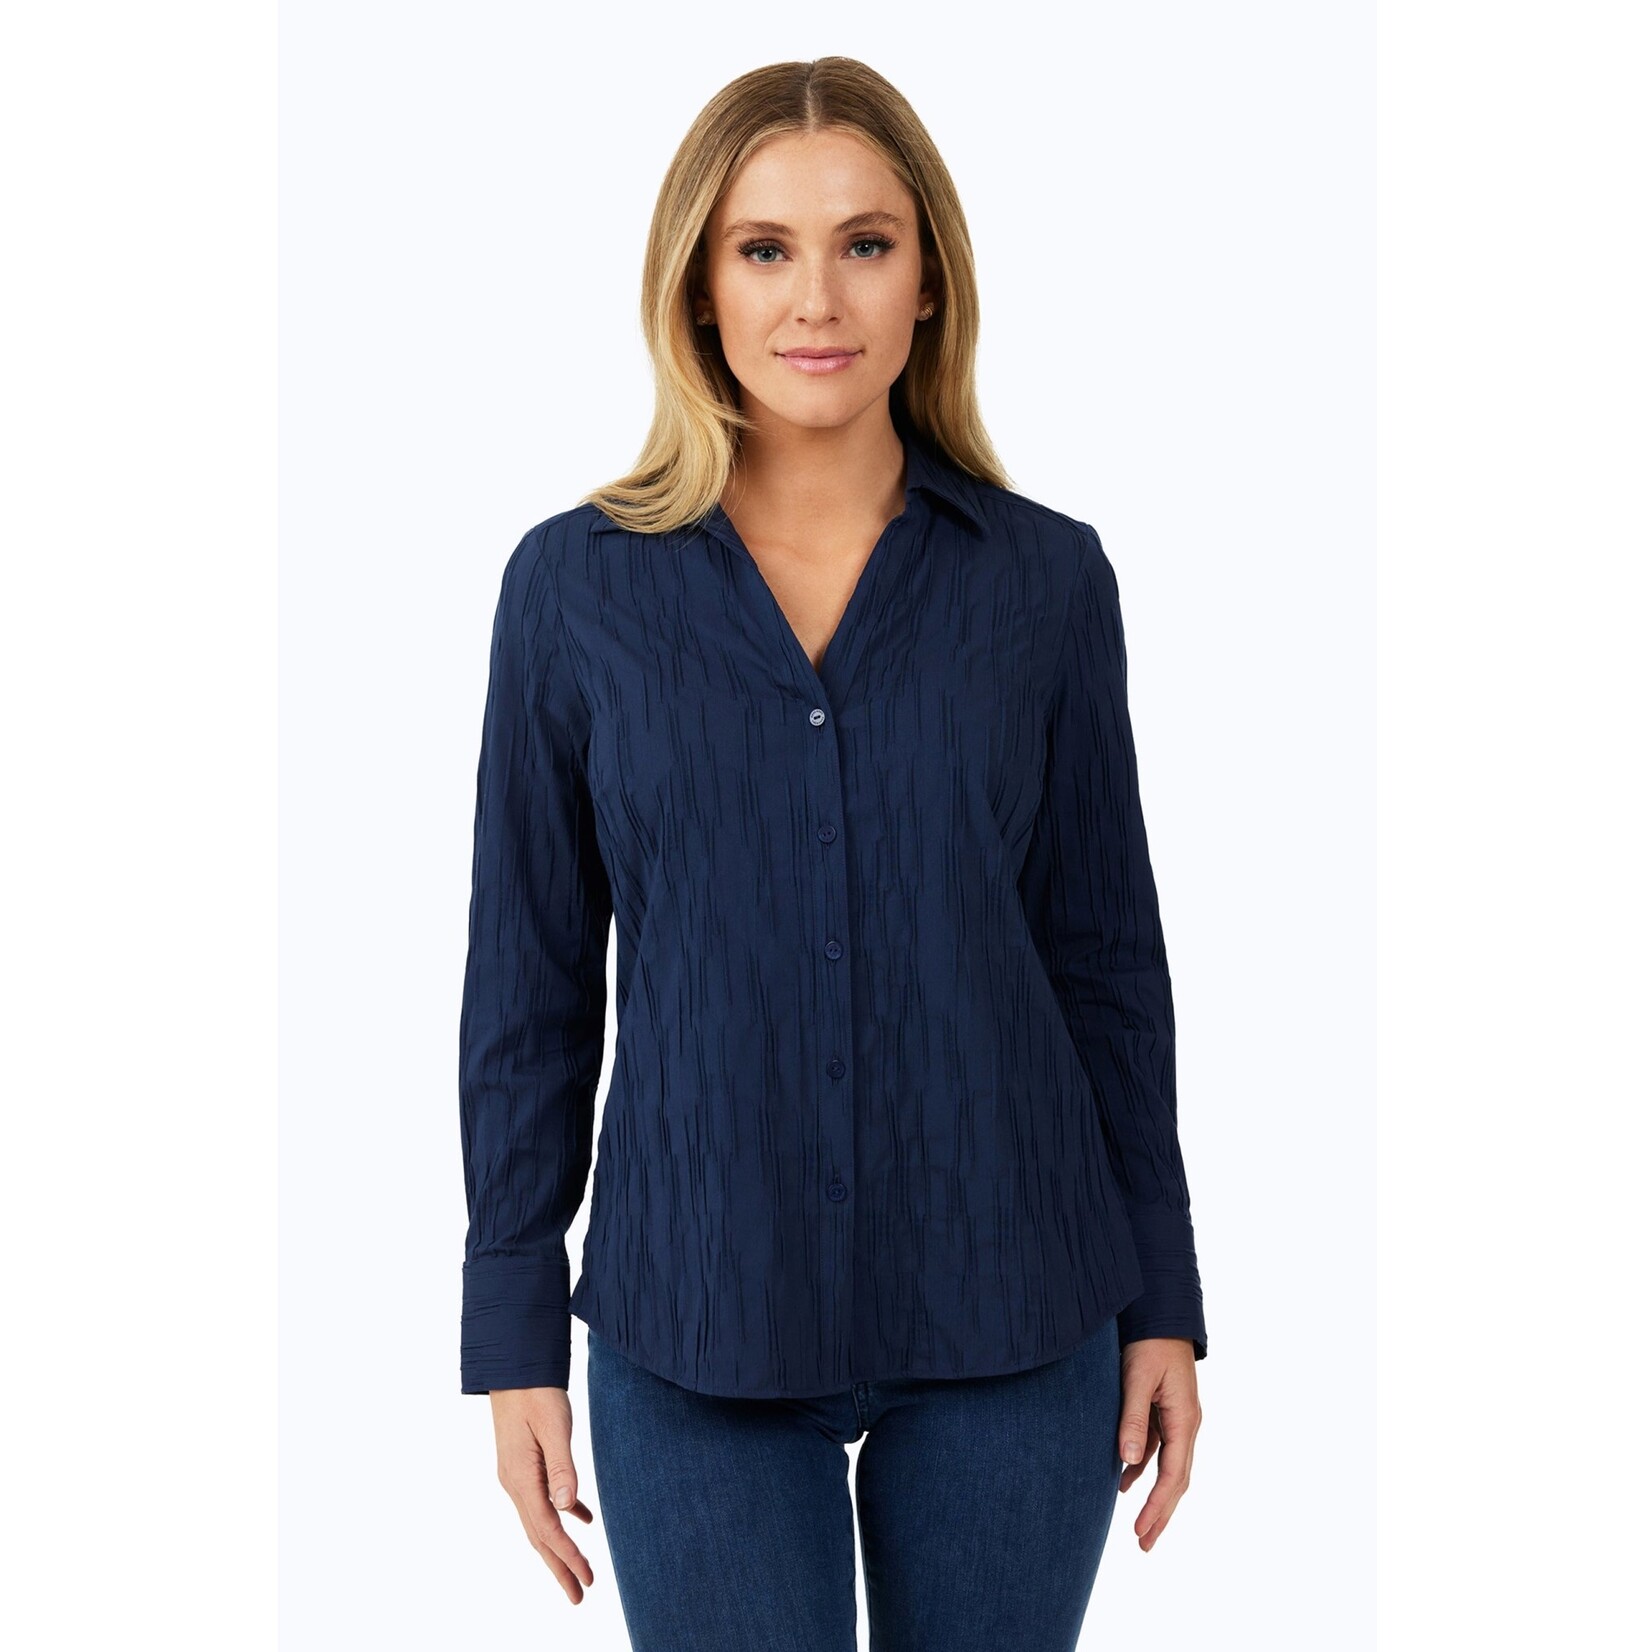 Foxcroft Collared Button Down Crinkled Shirt in Navy